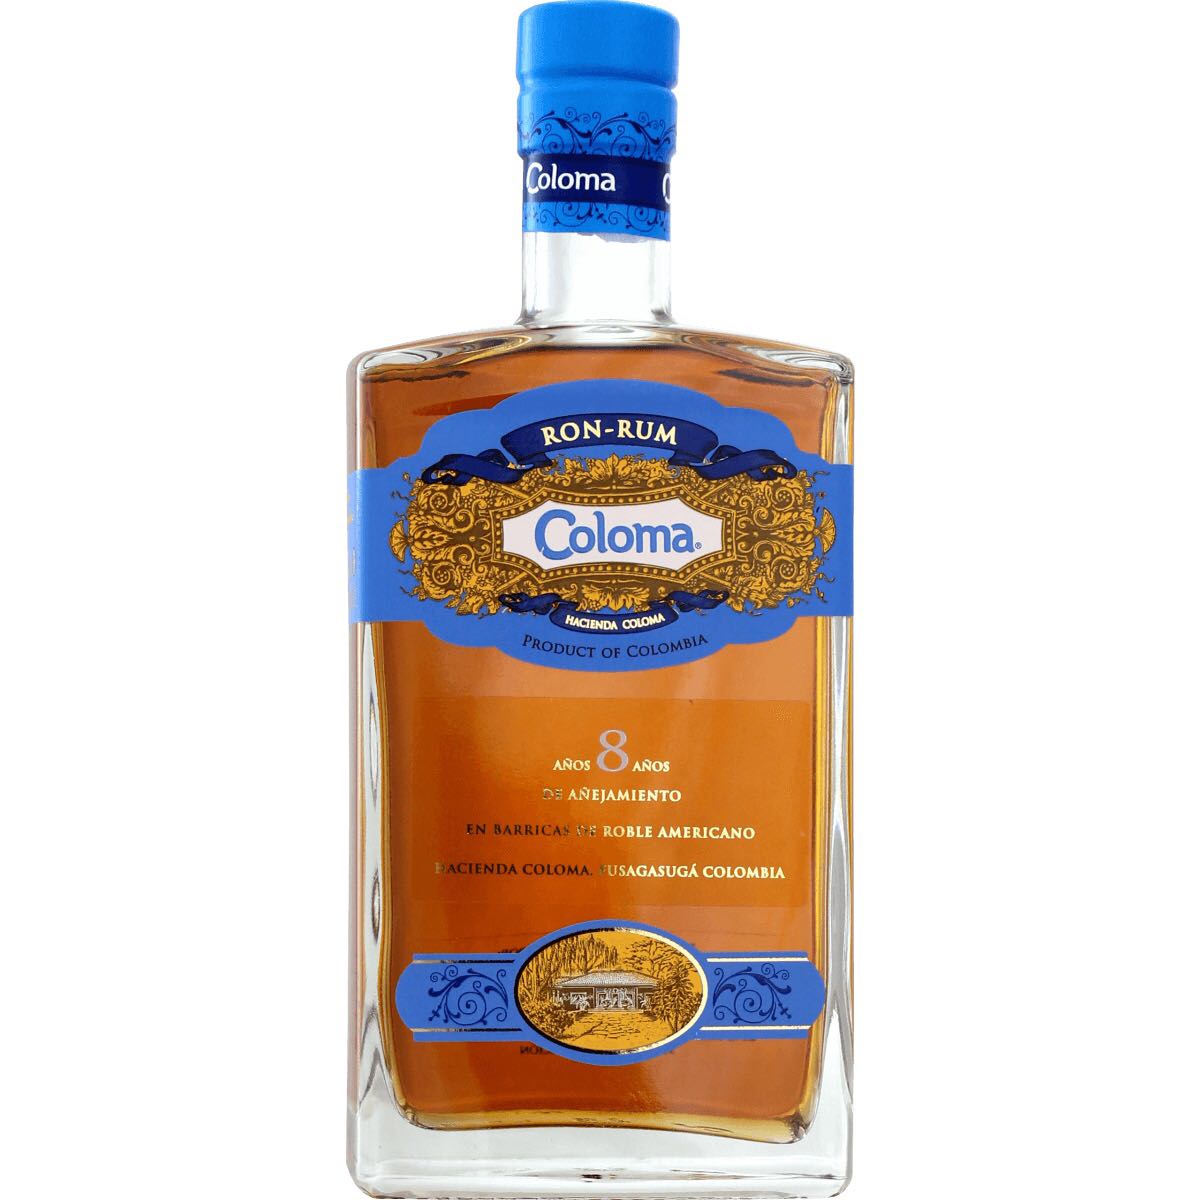 Bottle image of 8 Años